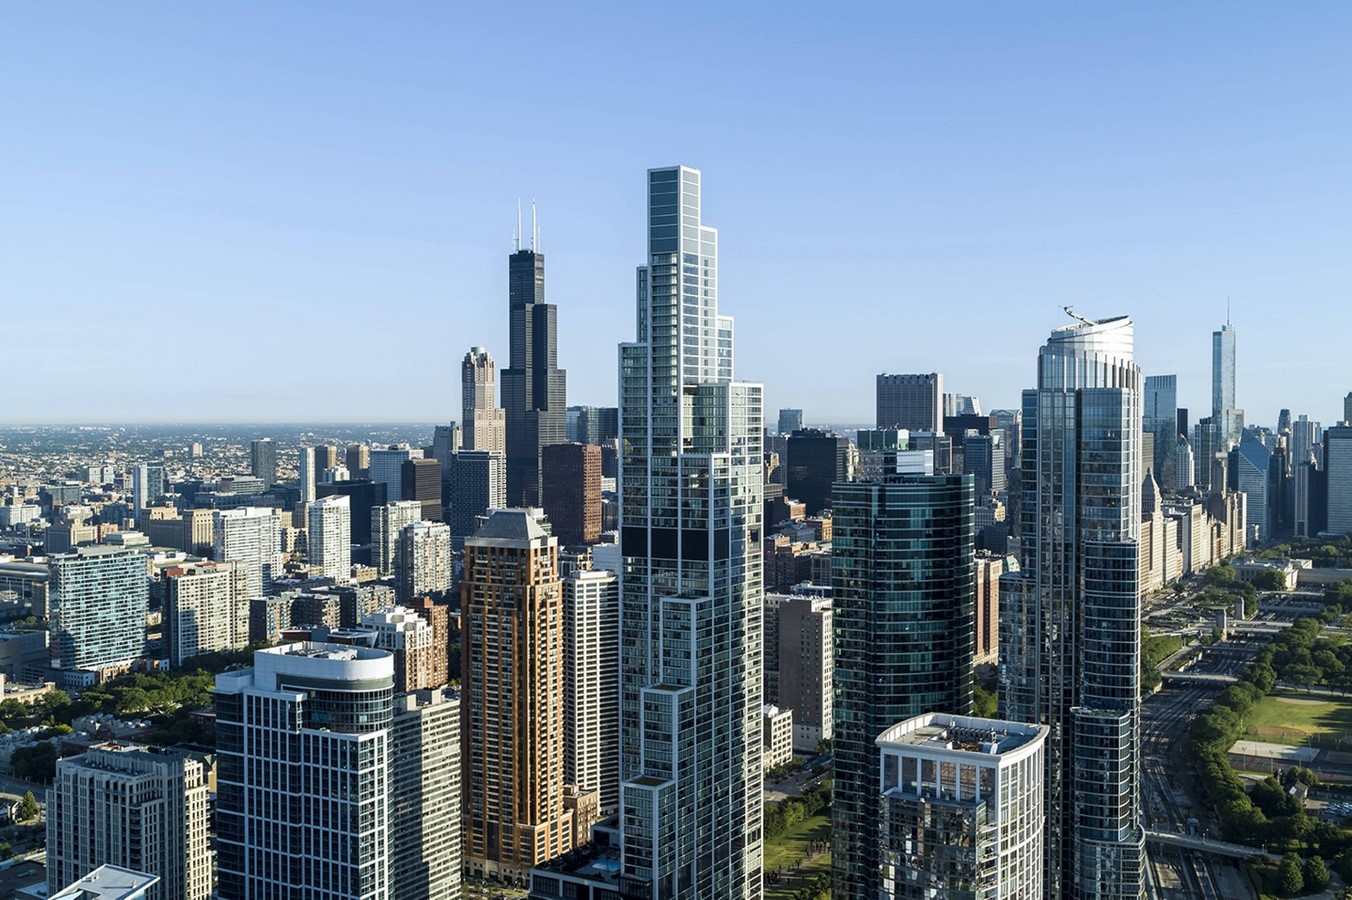 Buildings In Chicago: 15 Architectural Marvels Every Architect Must See - Sheet4